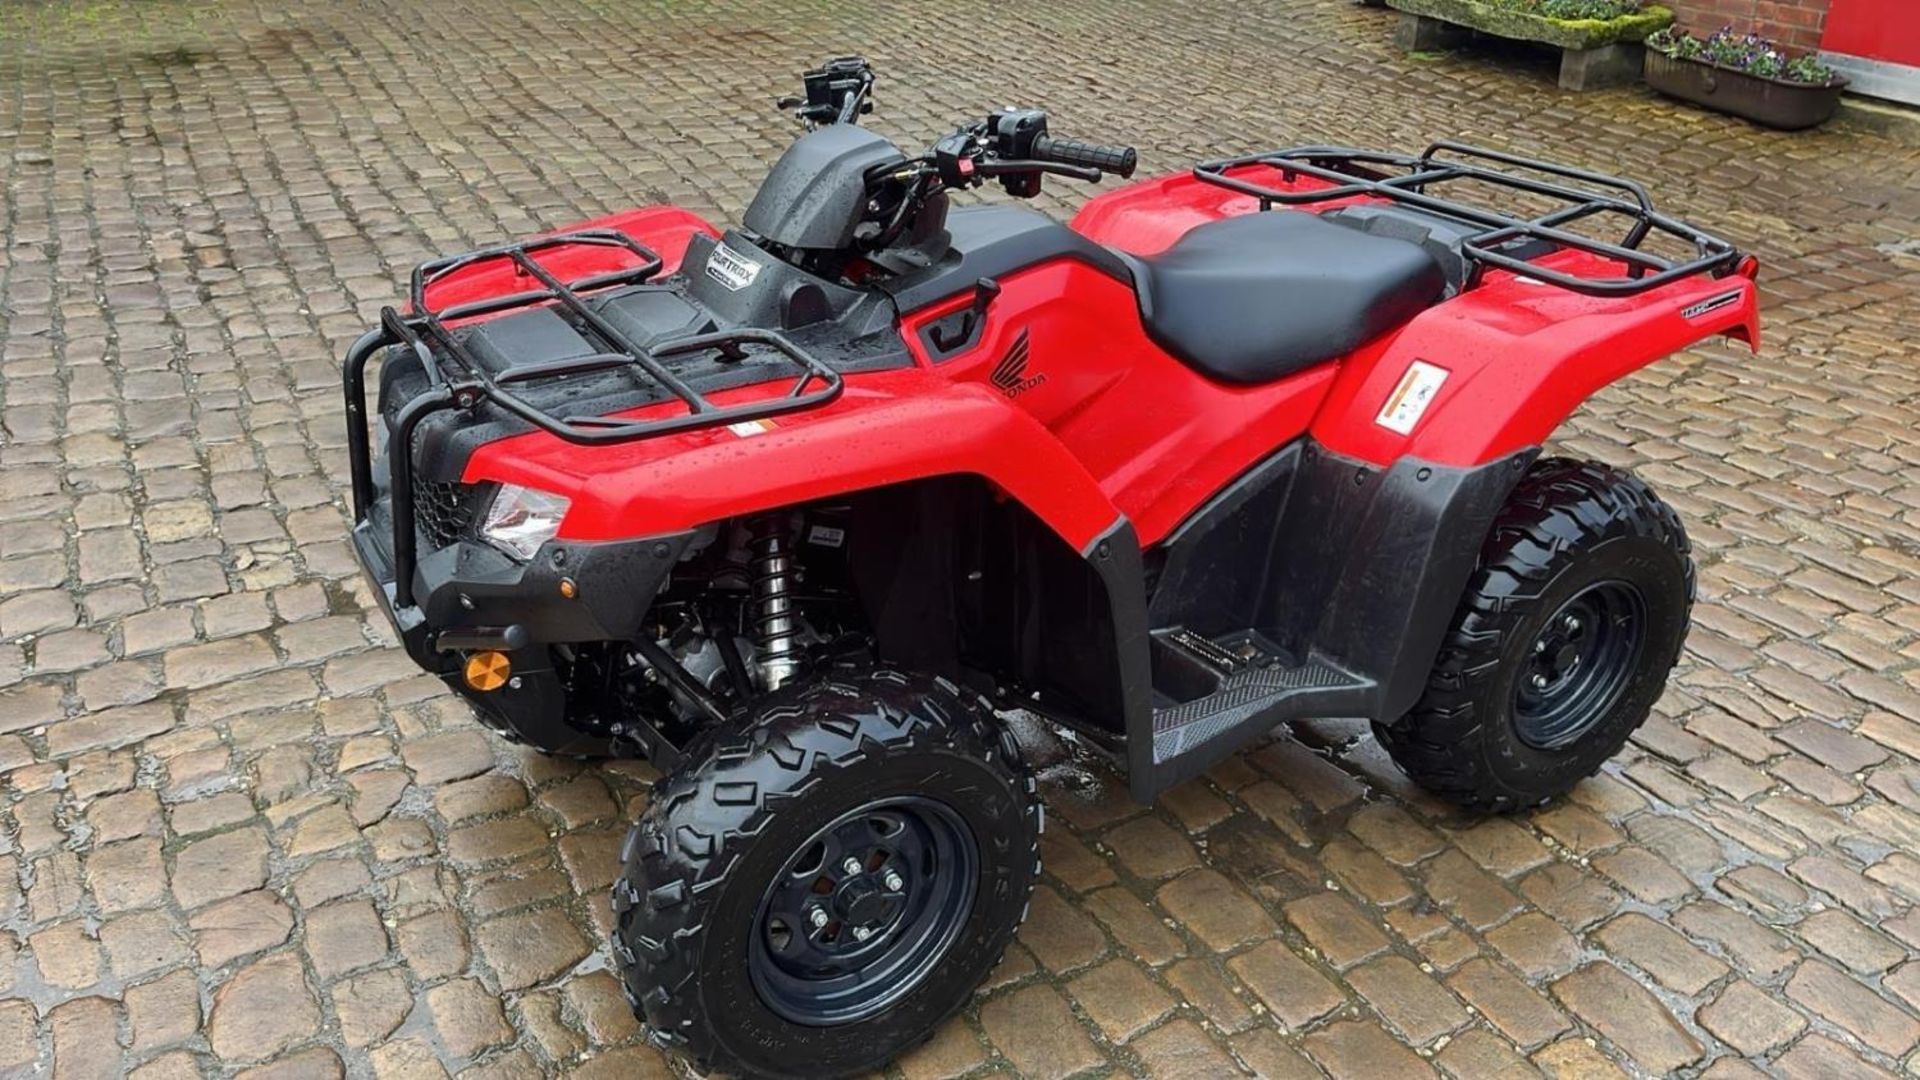 2018 HONDA TRX420FA6 FOURTRAX RANCHER AUTOMATIC DCT QUAD BIKE CAN BE SWITCED FROM 2 TO 4 WHEEL DRIVE - Image 13 of 21